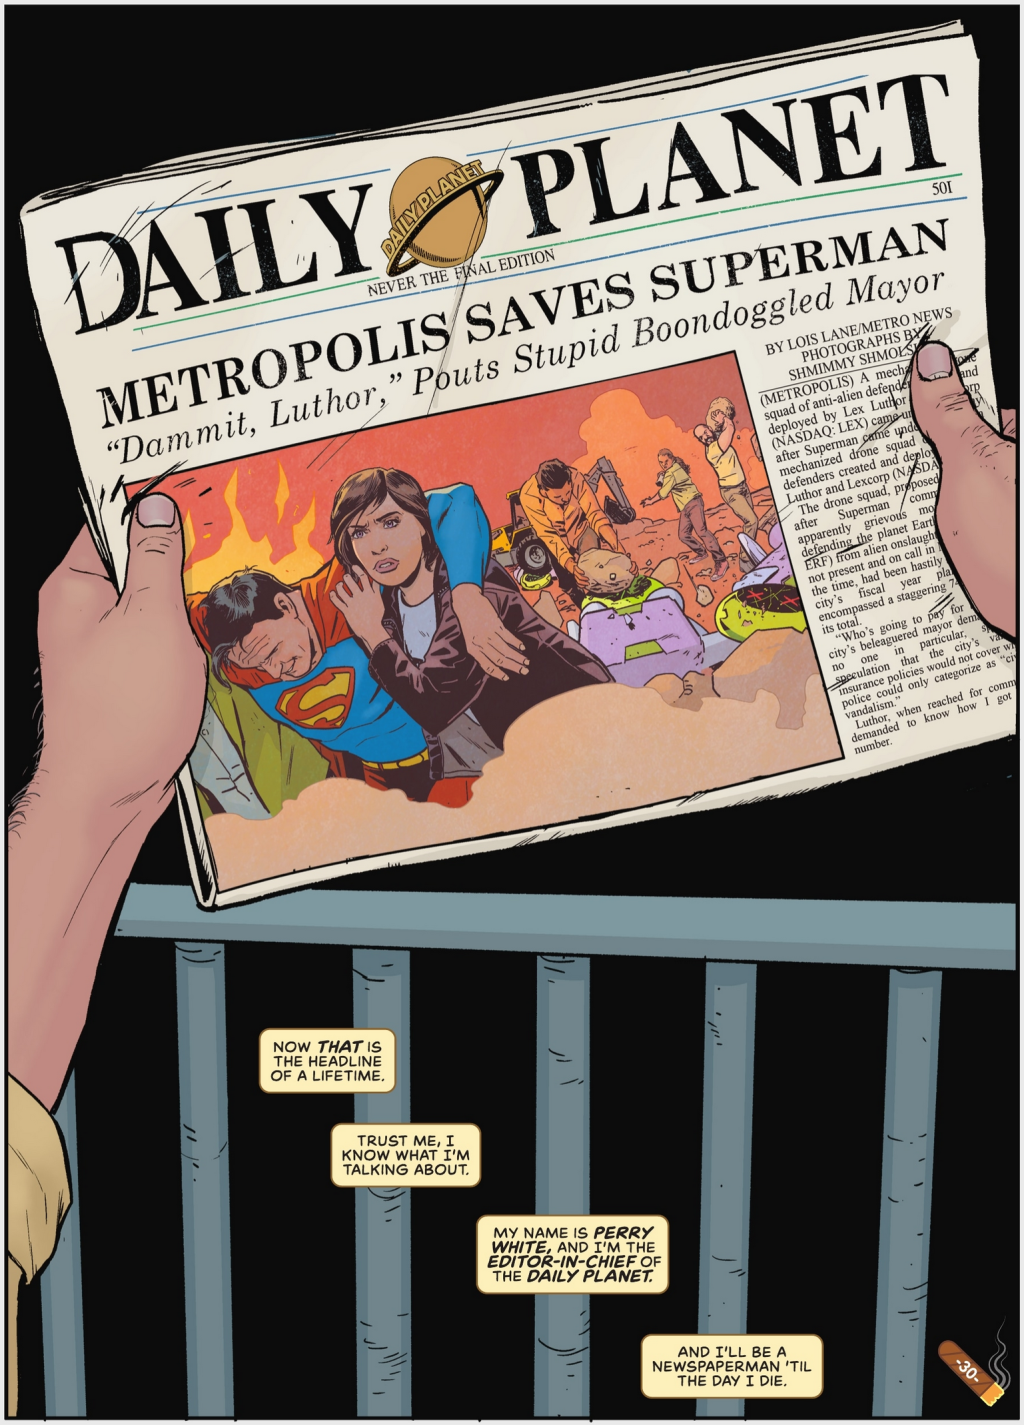 Perry White approves the next day's headline in Superman's Pal Jimmy Olsen's Boss Perry White Vol. 1 #1 "Metropolis Saves Superman" (2022), DC. Words by Matt Fraction, art by Steve Lieber, Nathan Fairbairn, and Clayton Cowles.